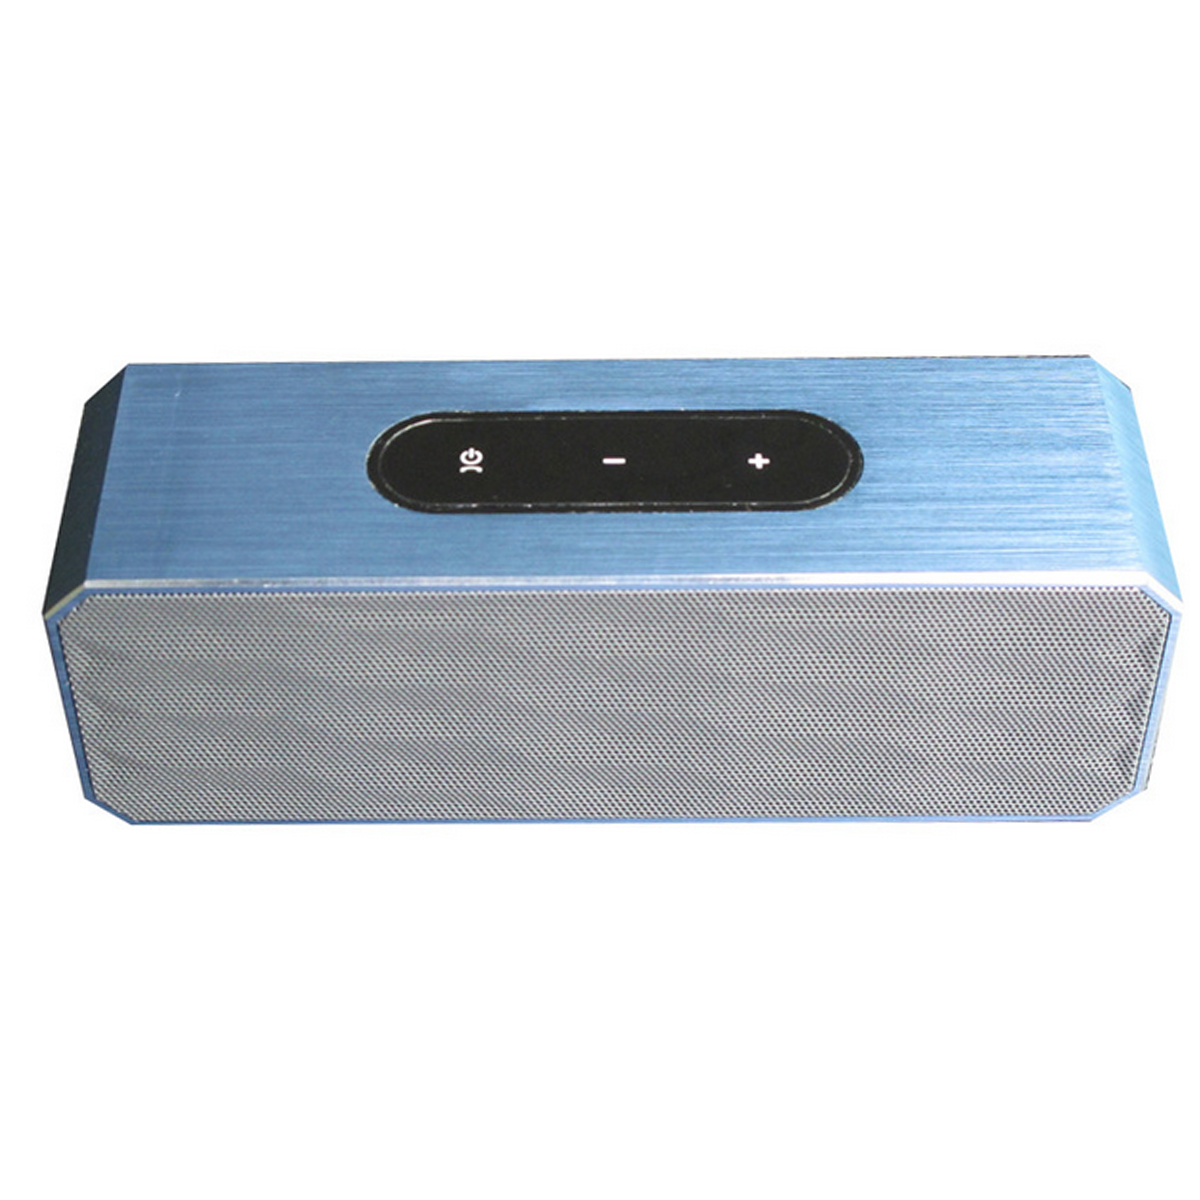 Find 5W x 2 Portable Aluminum bluetooth Speaker HIFI Stereo Sound Long Endurance 2000mAh Outdoor Speaker for Sale on Gipsybee.com with cryptocurrencies